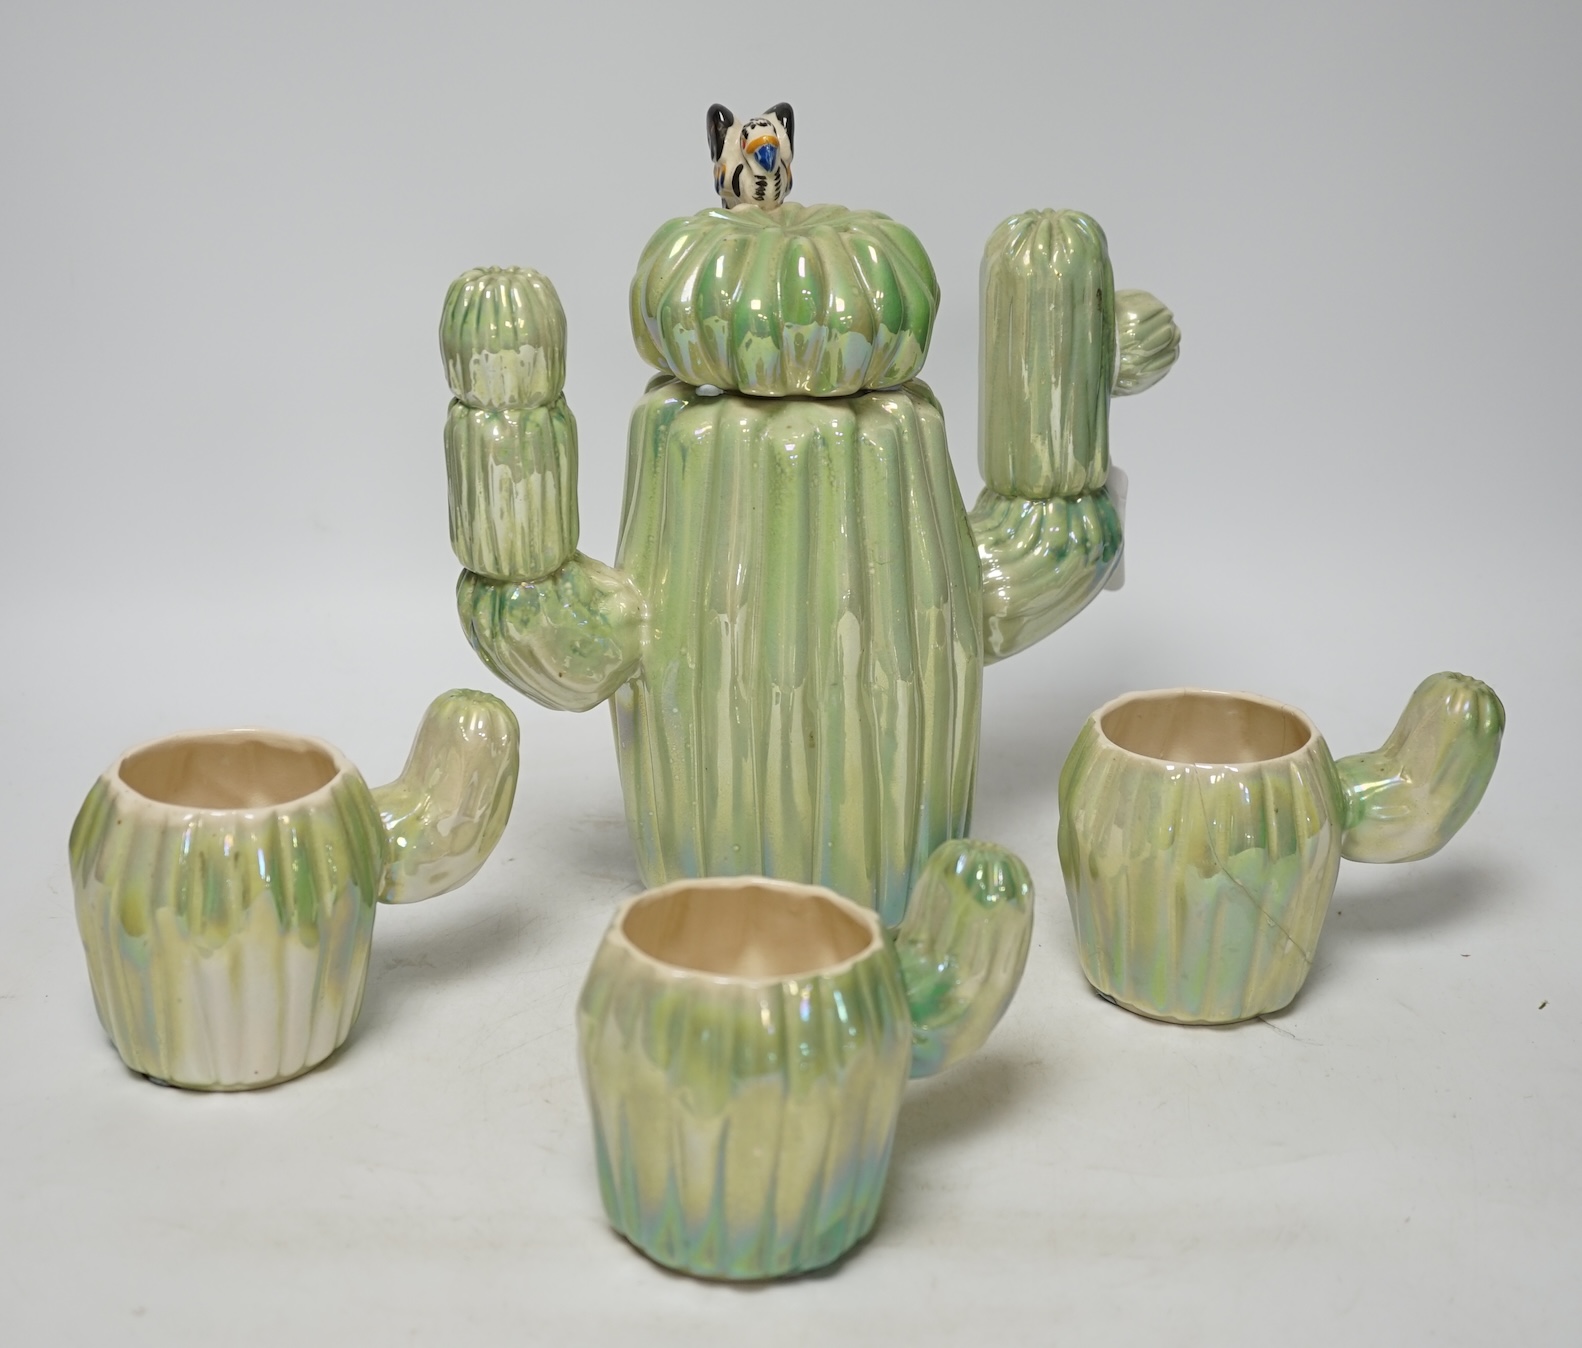 From the Studio of Fred Cuming. A cactus design part coffee set, largest 24cm high. Condition - fair, one cup broken and repaired